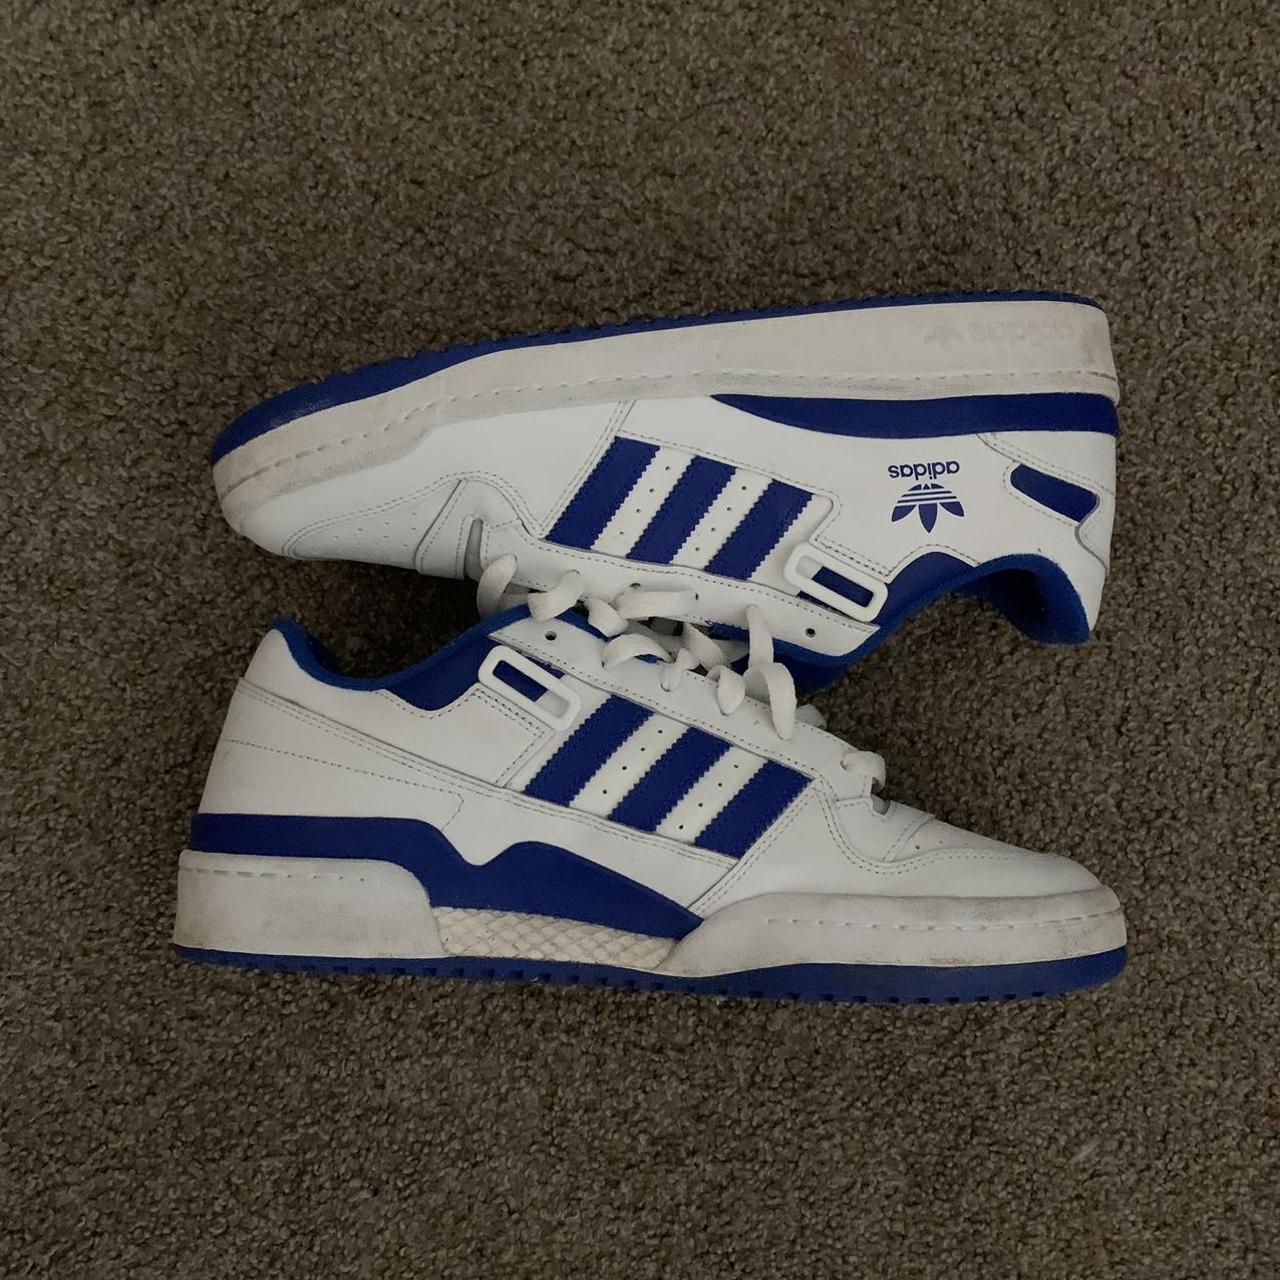 Adidas Men's White and Blue Trainers